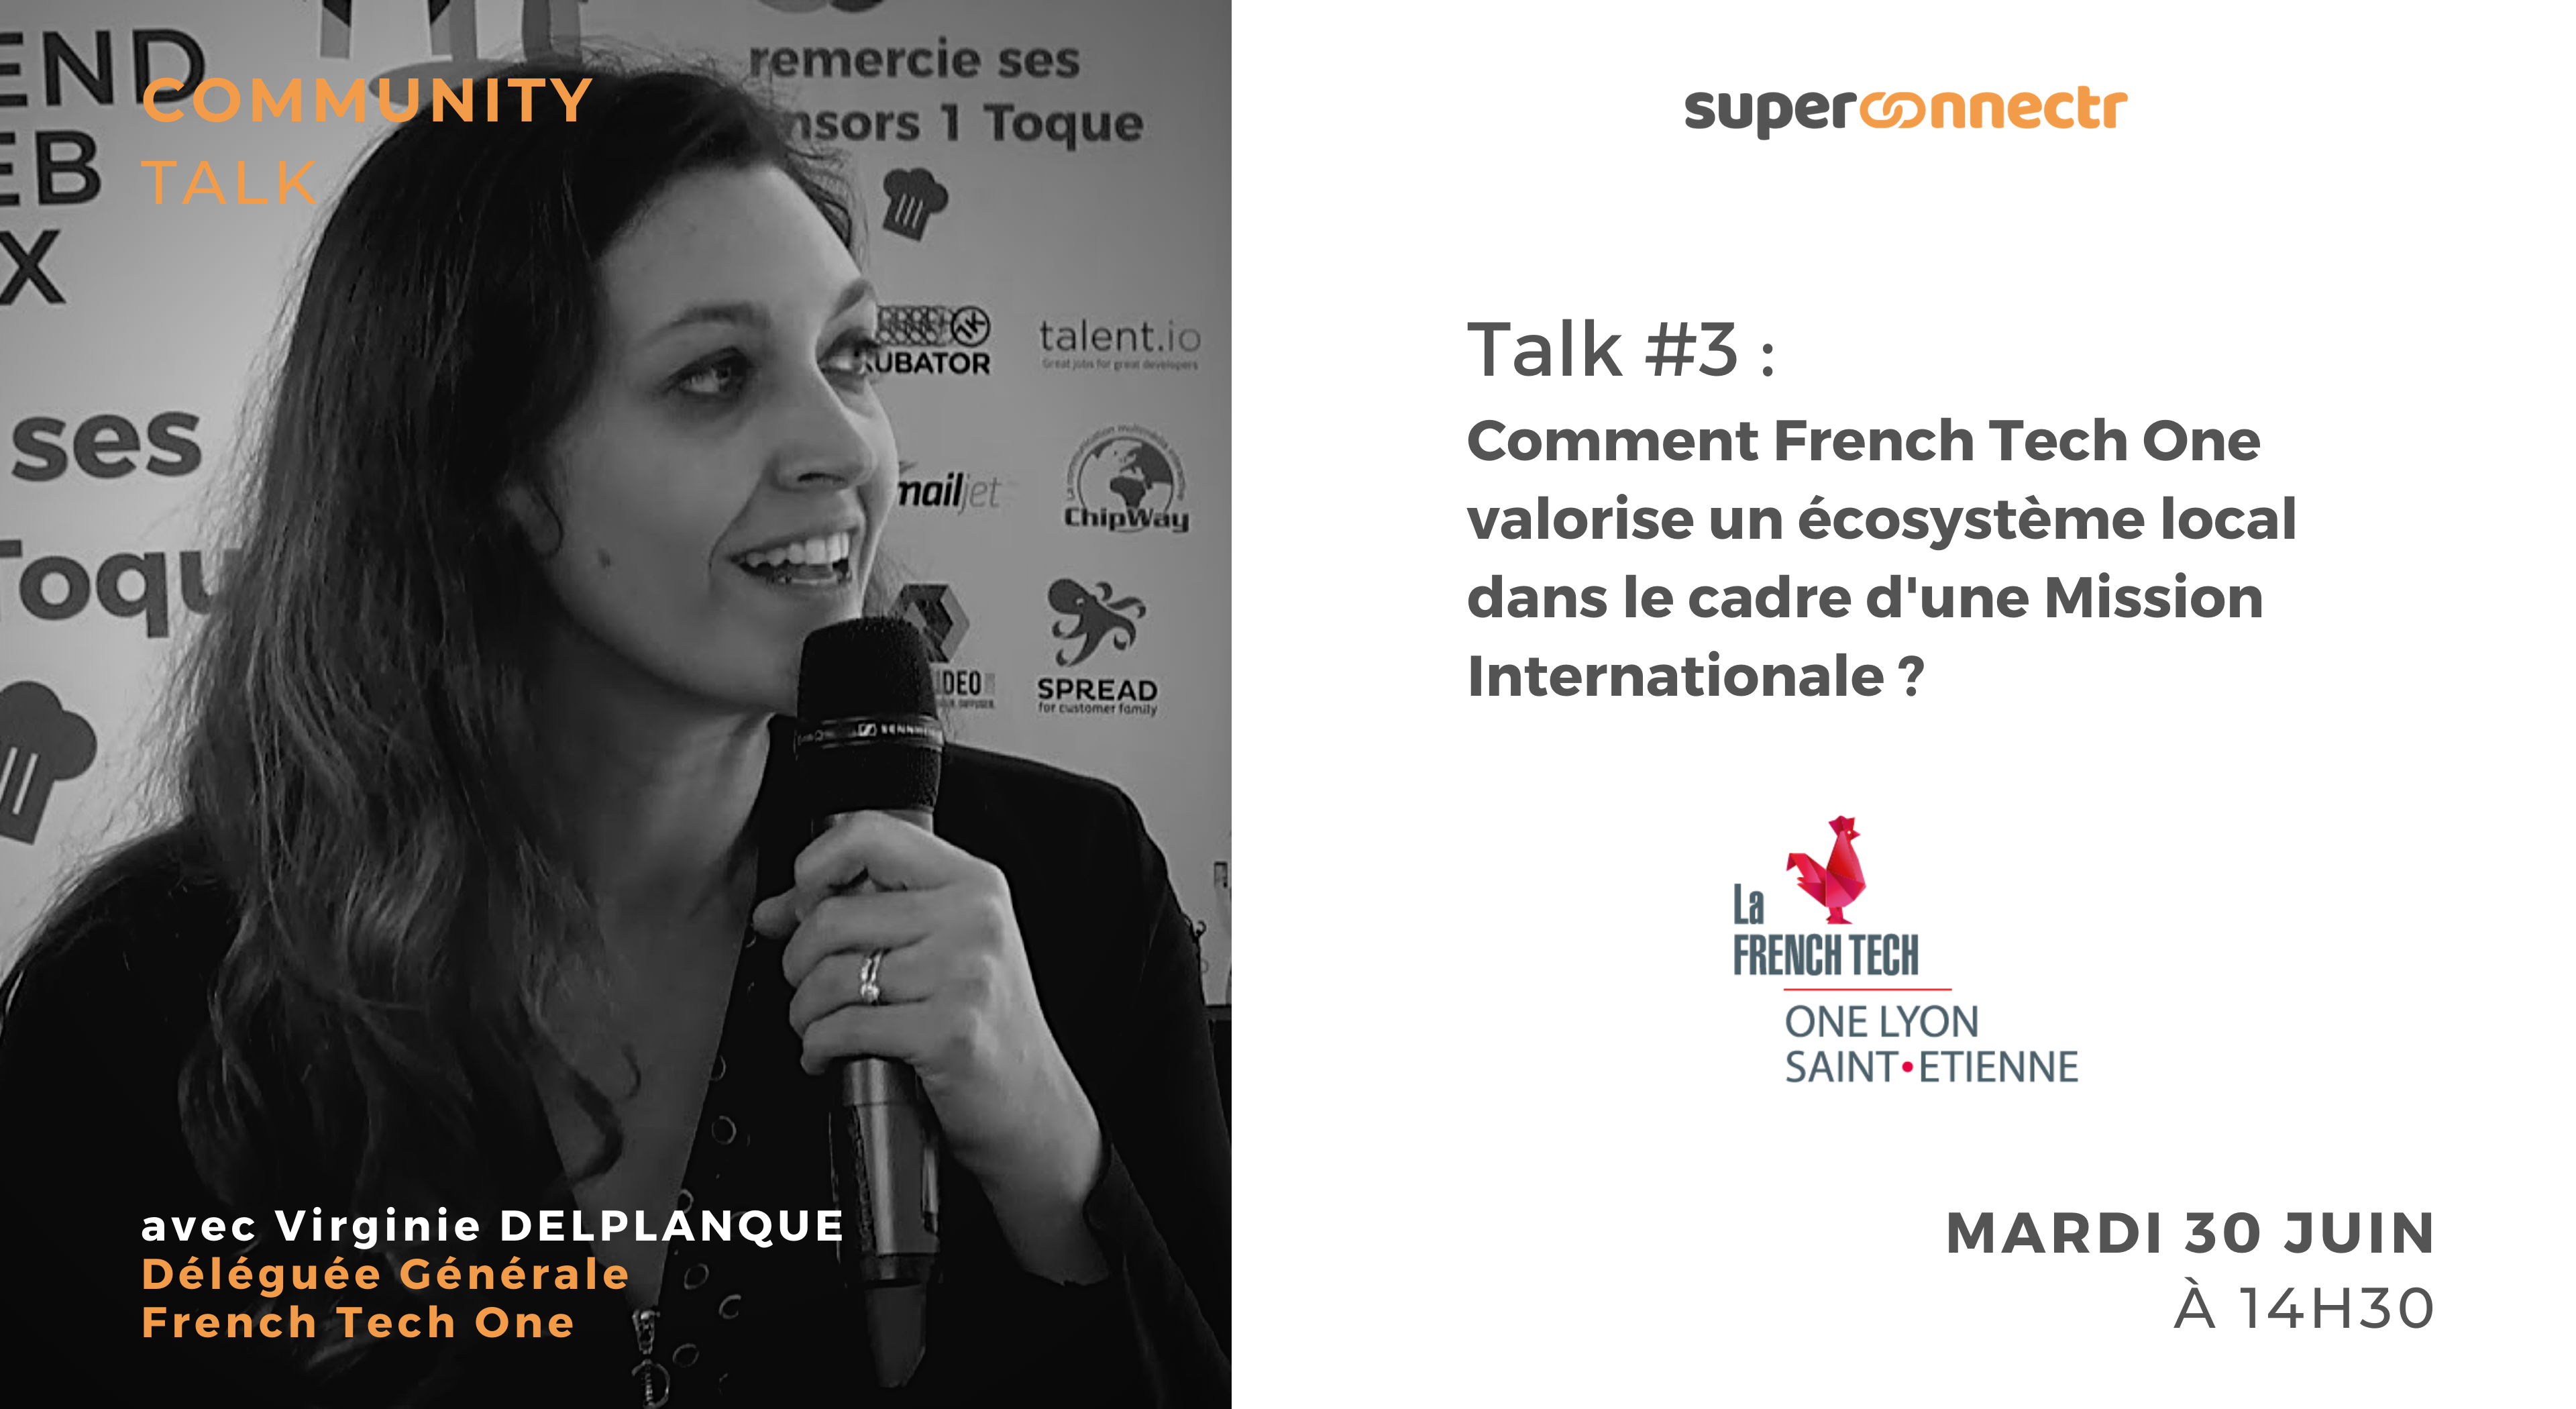 Interview: &quot;How does French Tech One enhance a local ecosystem as part of an International Mission?&quot;